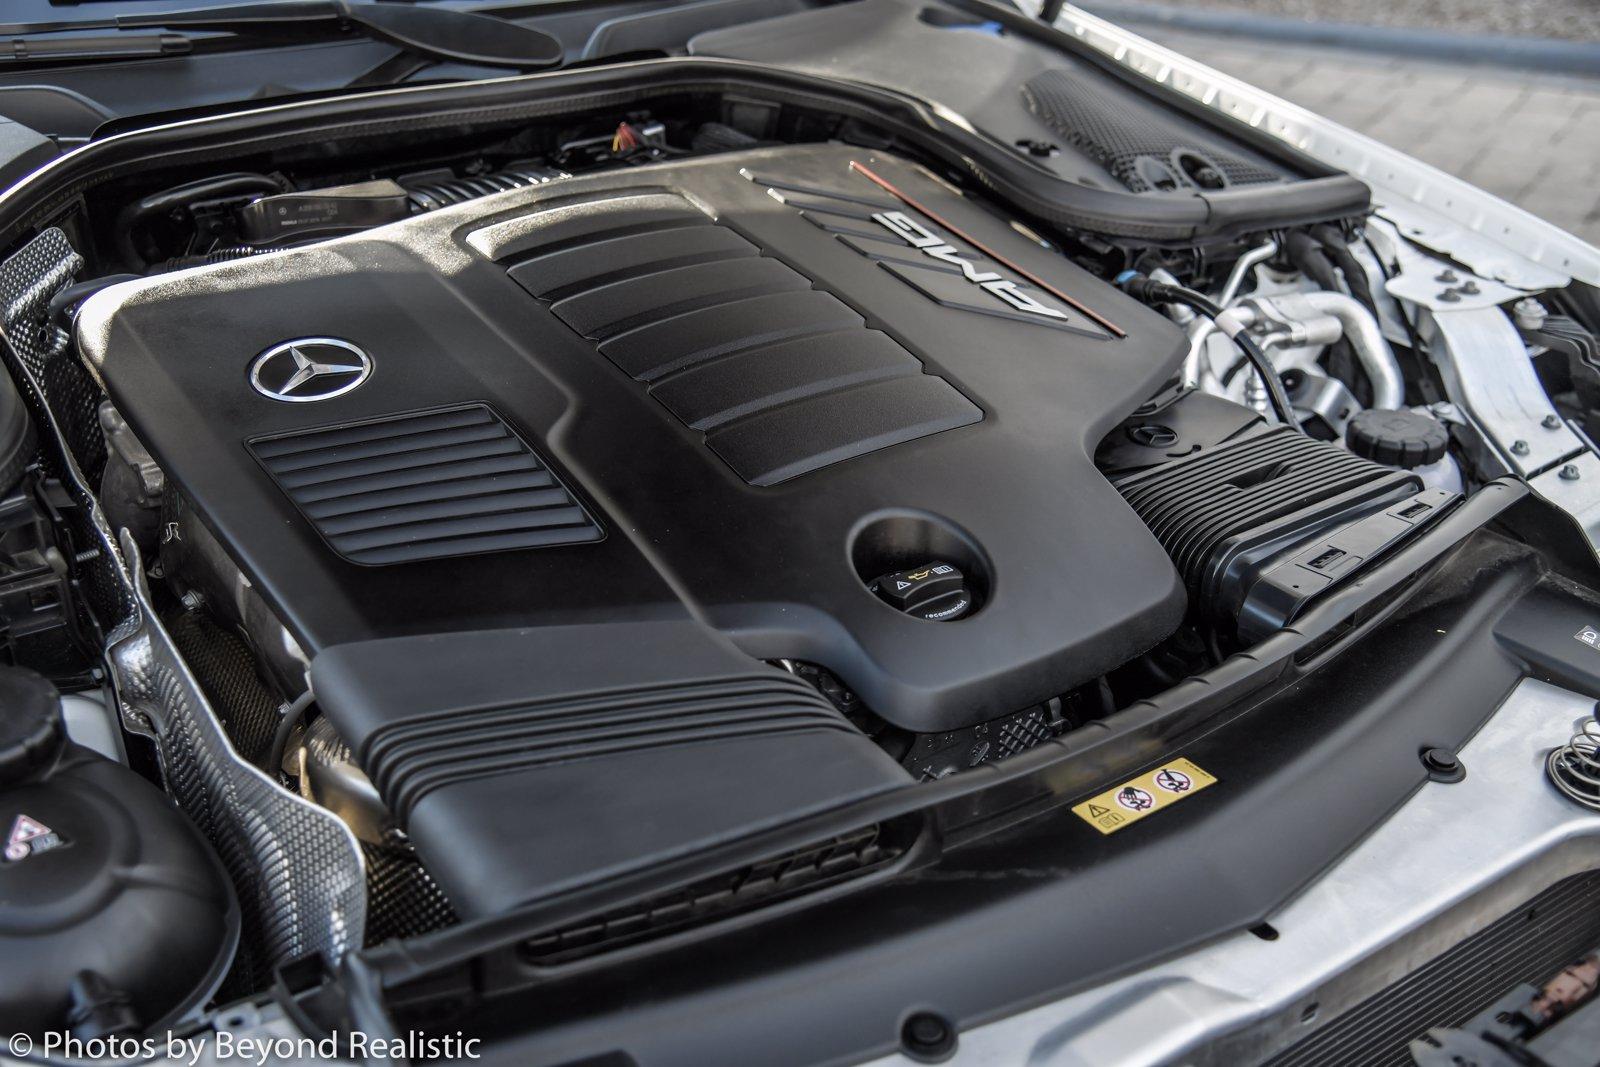 Used 2020 Mercedes-Benz AMG CLS 53, AMG Night Pkg, | Downers Grove, IL